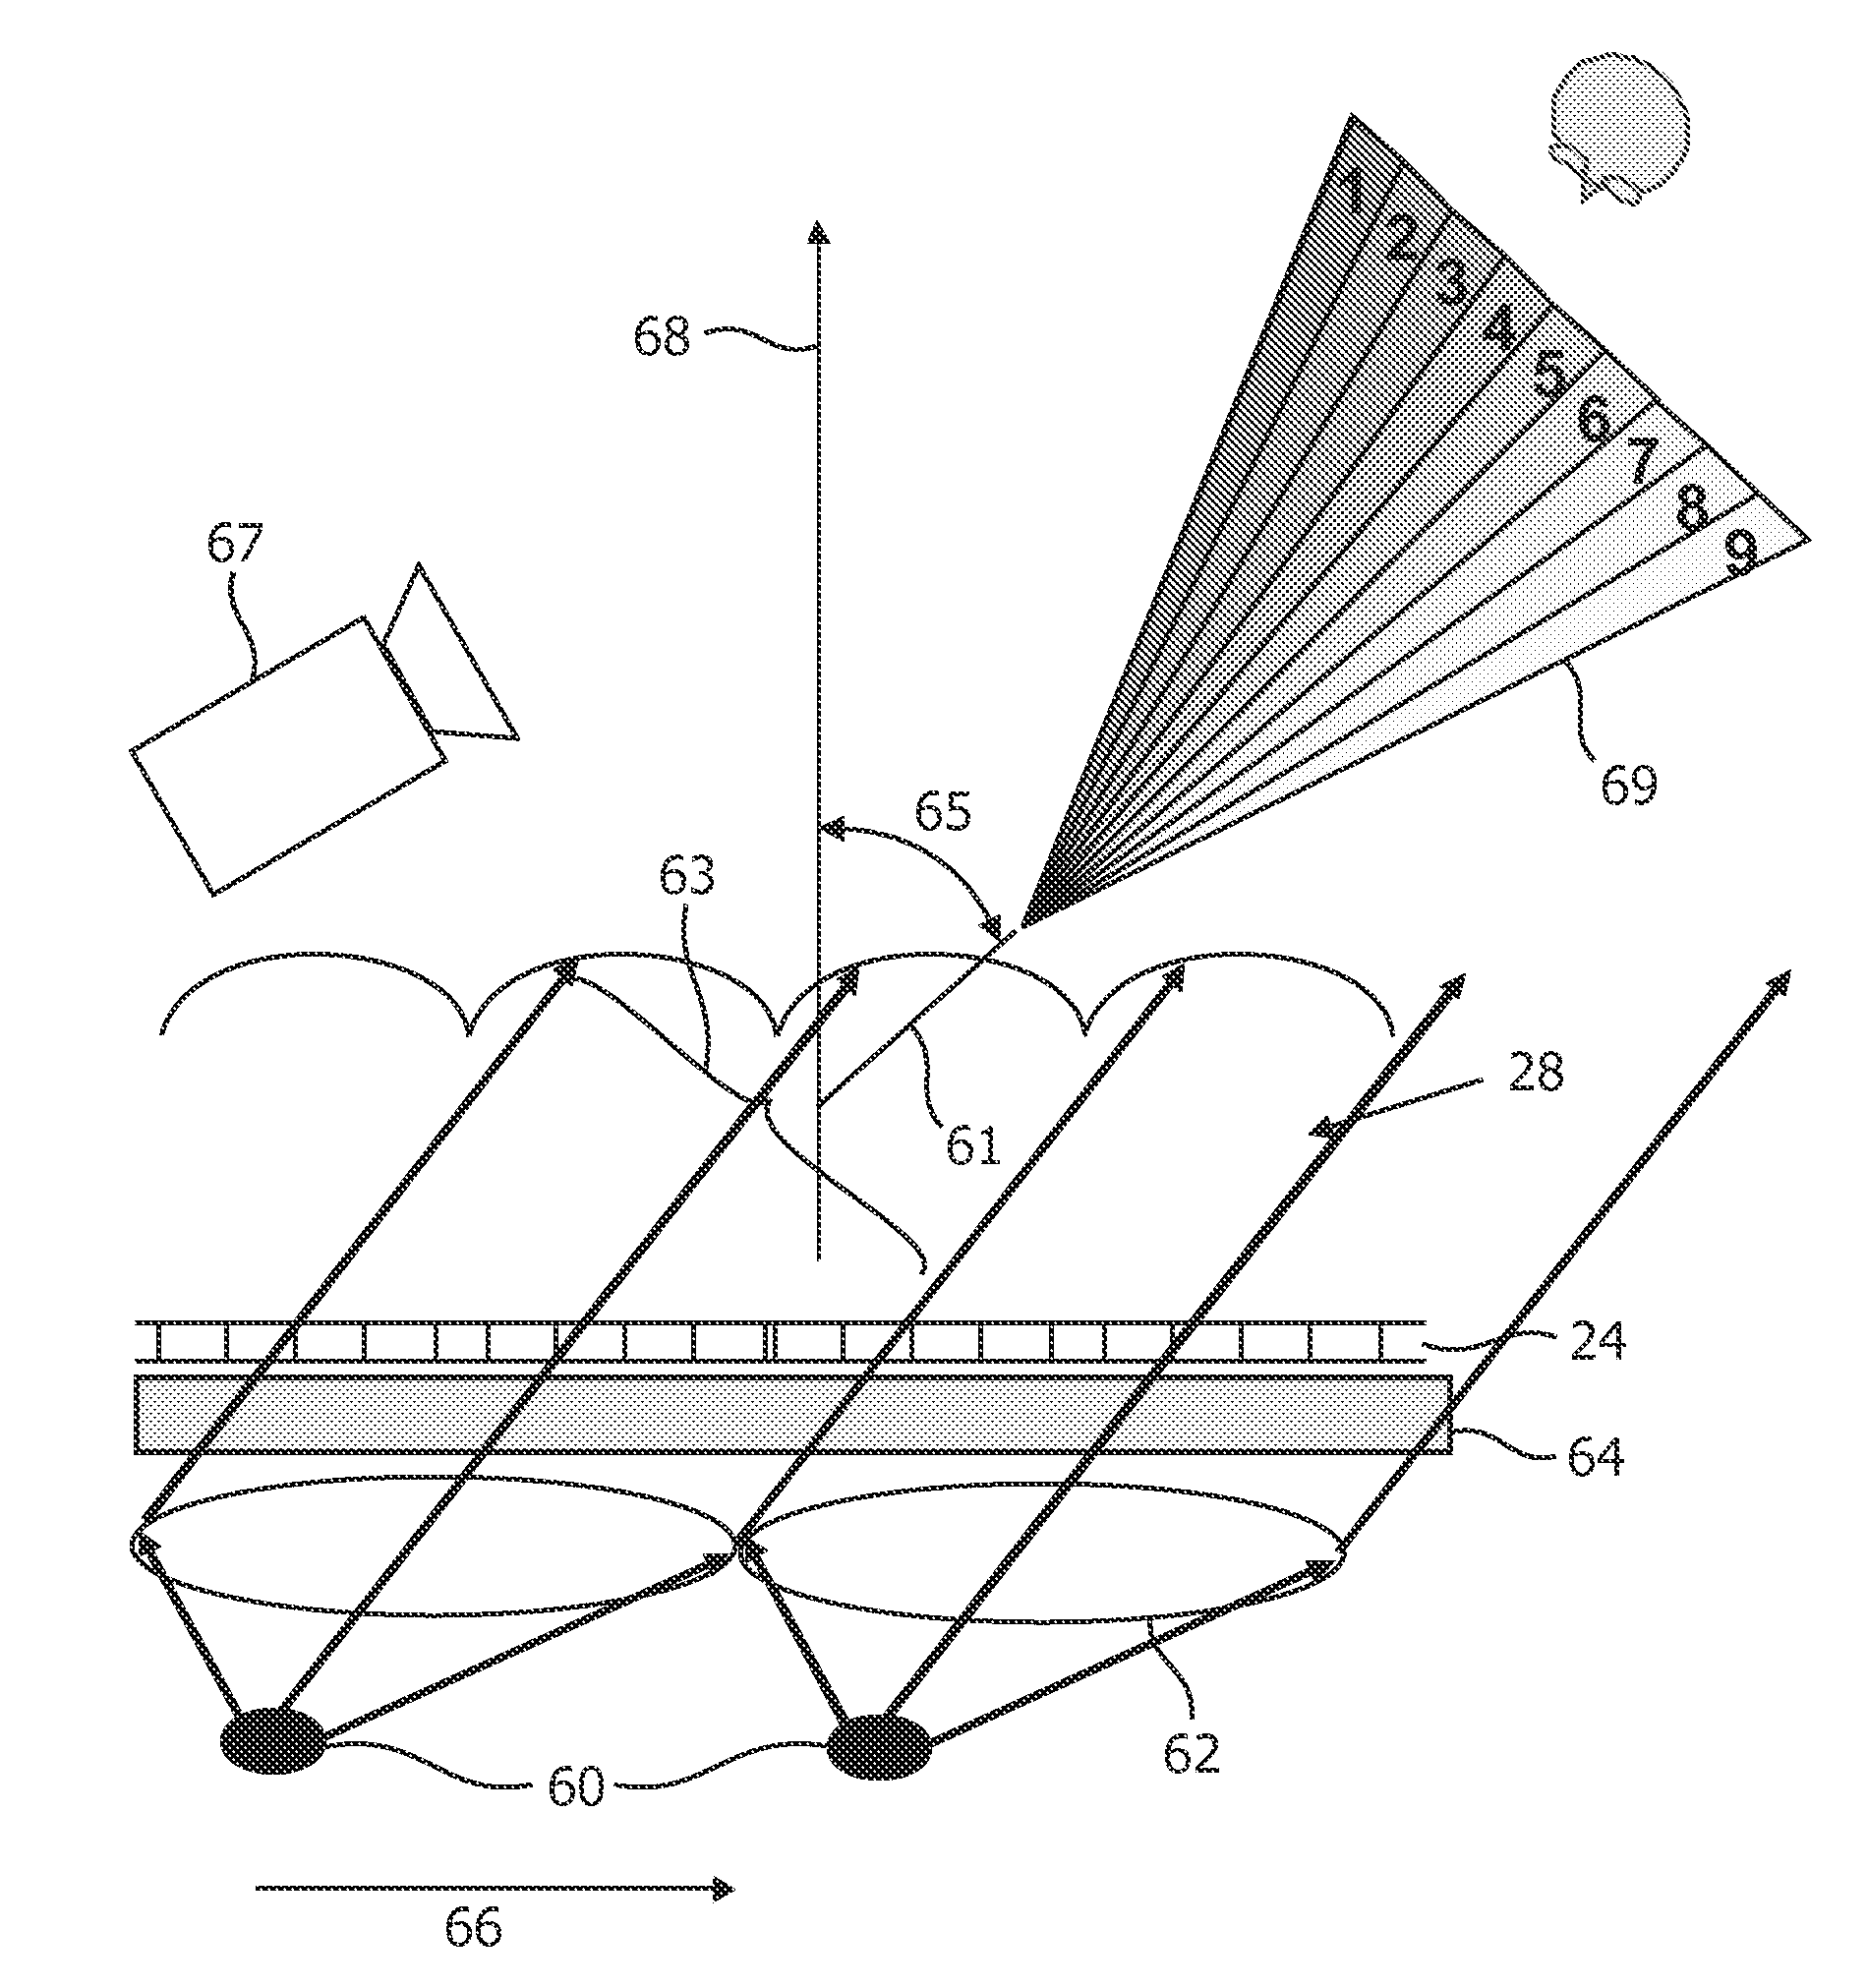 Multi-view display device